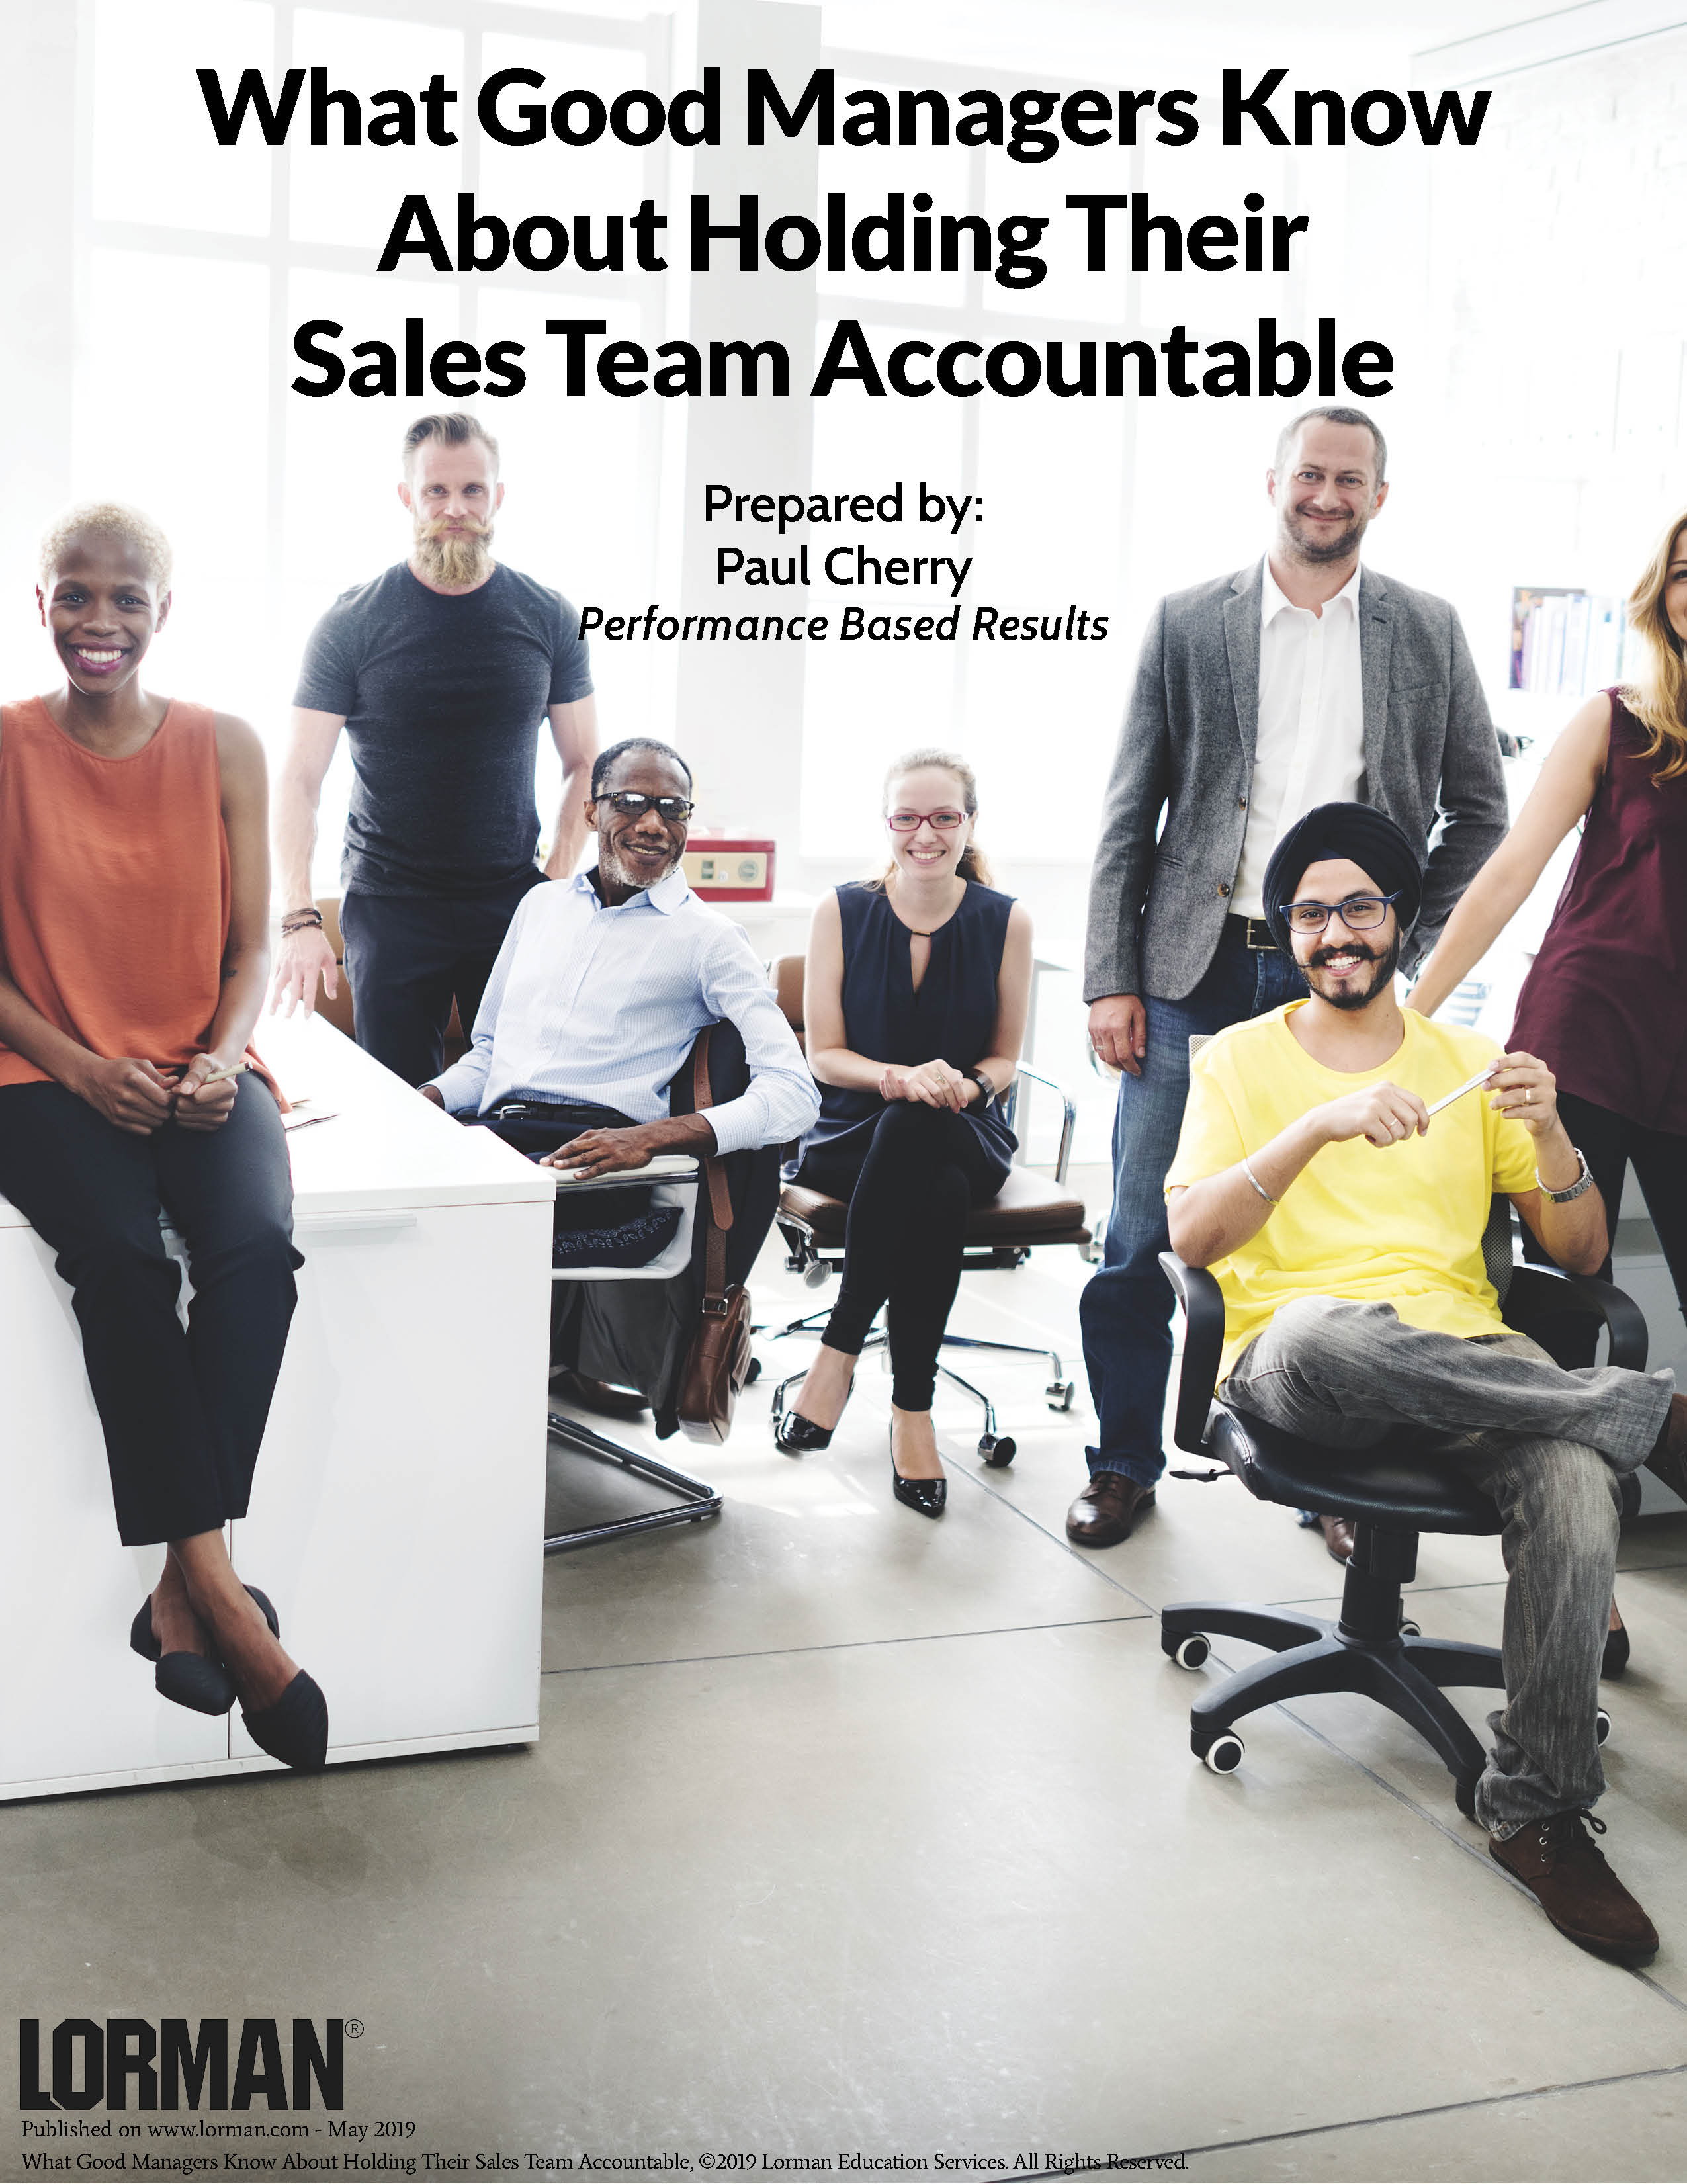 What Good Managers Know About Holding Their Sales Team Accountable